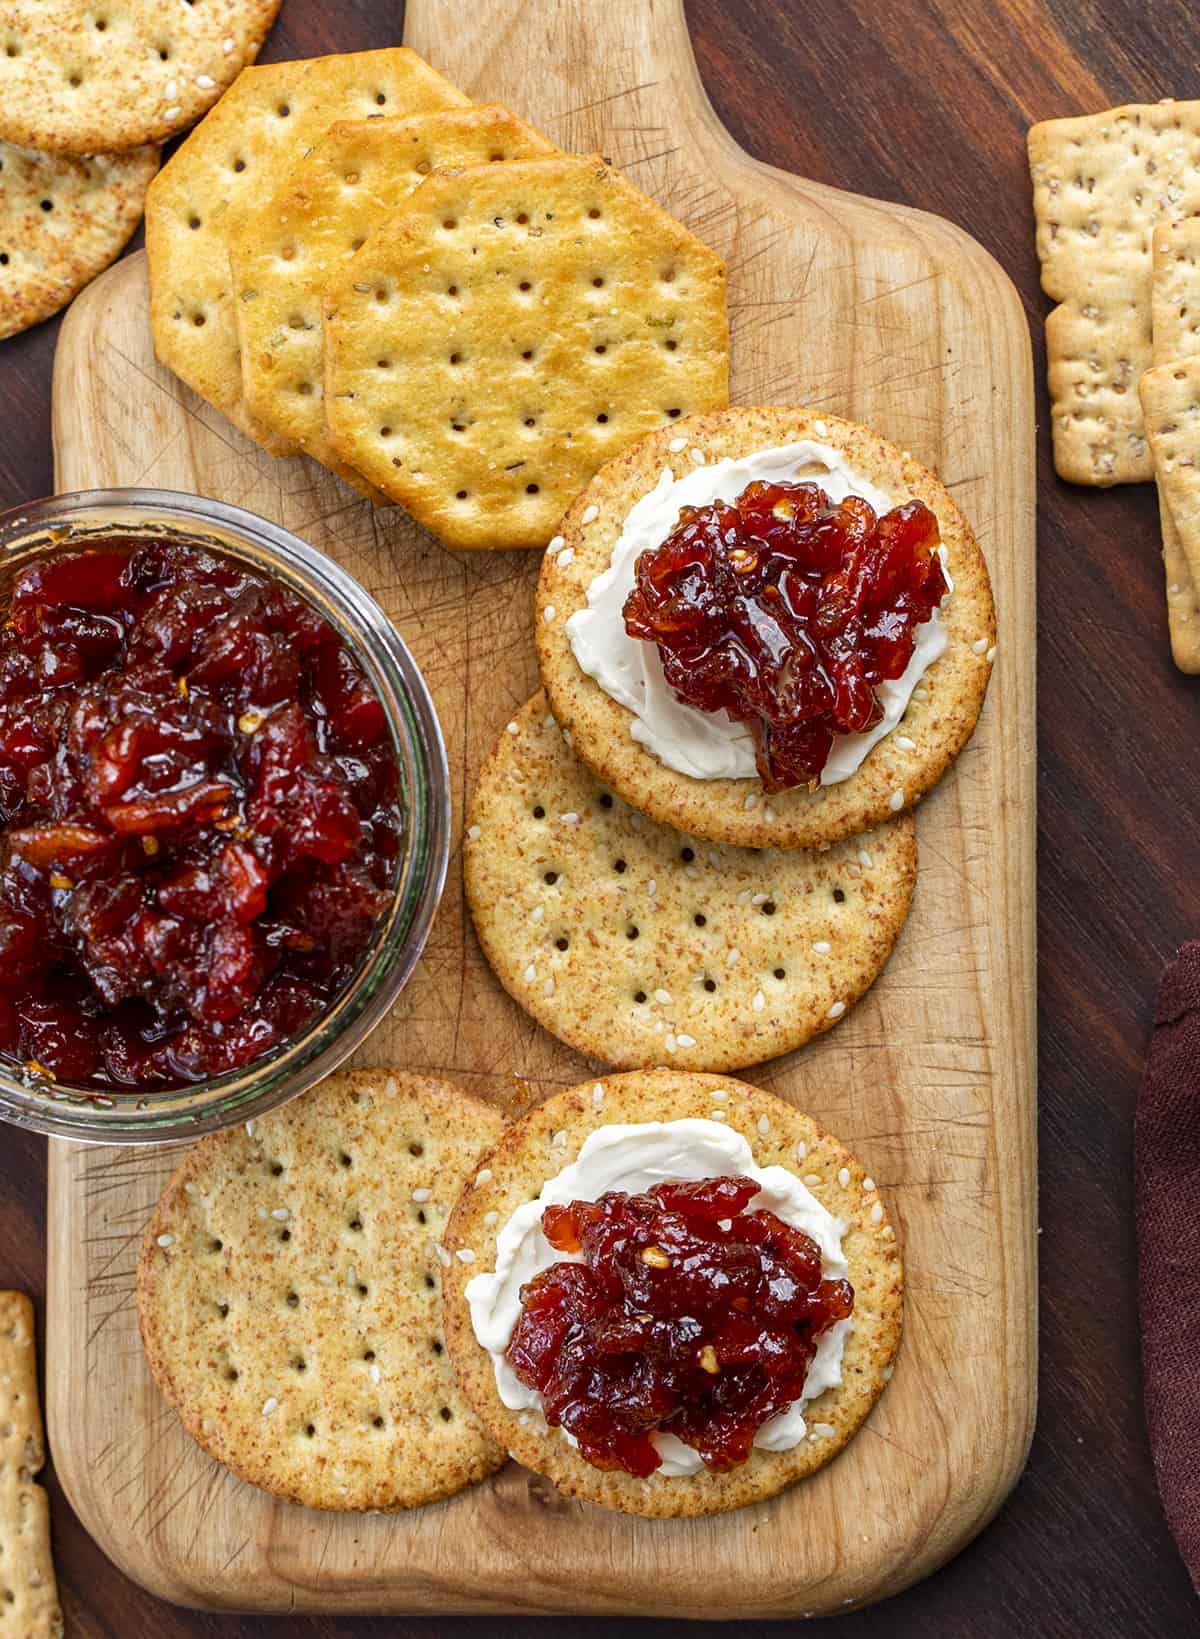 Overhead Image of Crackers with Spicy Tomato Jam on Crackers and the Jar of Jam. Appetizer, Burger Topping Idea, Tomato Jam, How to Make Tomato Jam, Spicy Jam, Homemade Tomato Jam, How to Can Tomato Jam, Cracker Spreads, Super Bowl Food, Christmas Appetizers, Thanksgiving Appetizers, i am homesteader, iamhomesteader